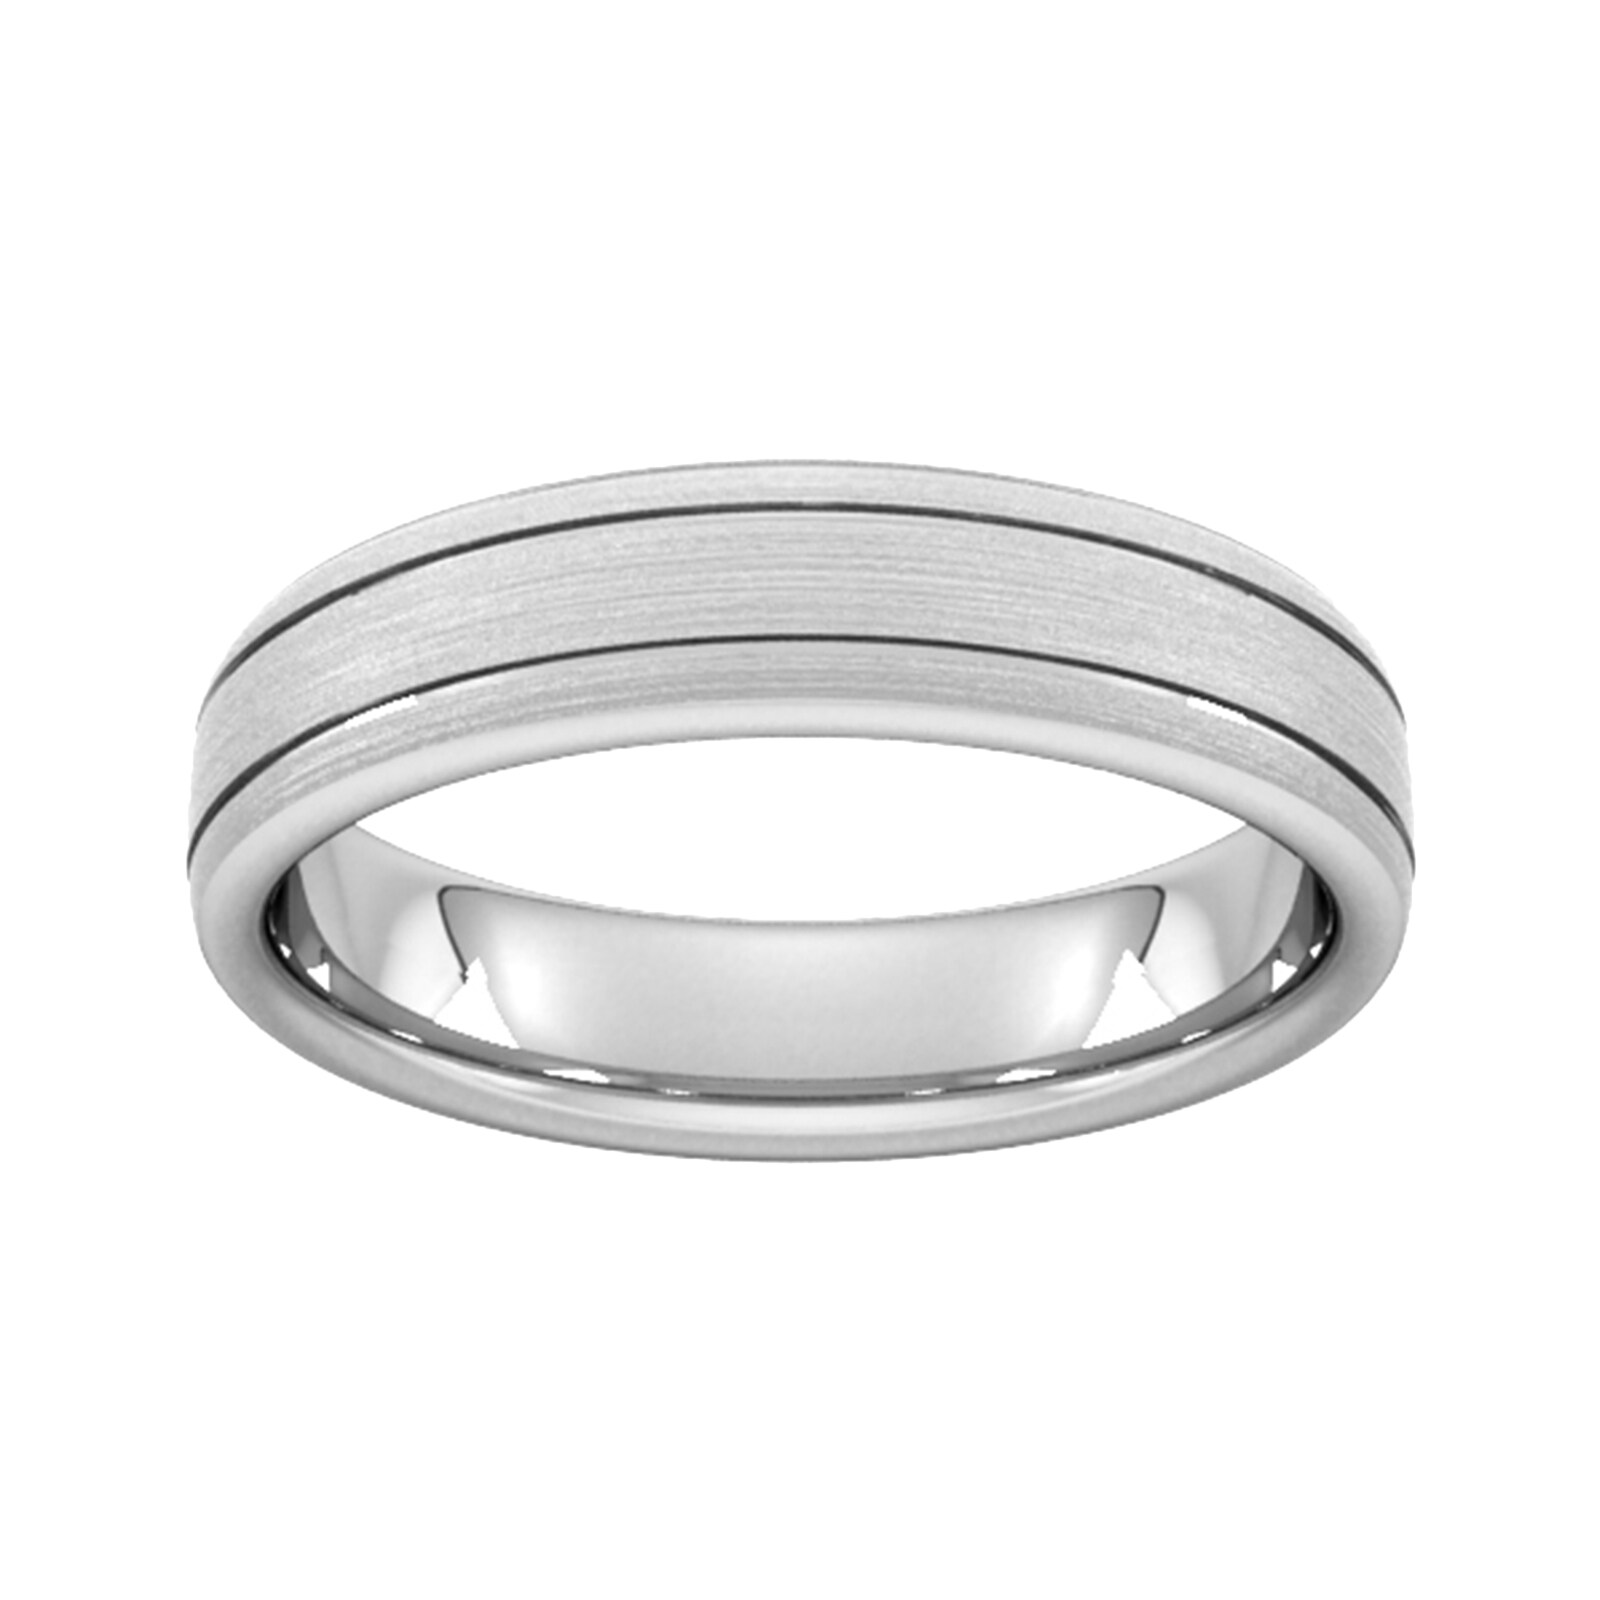 5mm Flat Court Heavy Matt Finish With Double Grooves Wedding Ring In Platinum - Ring Size Q